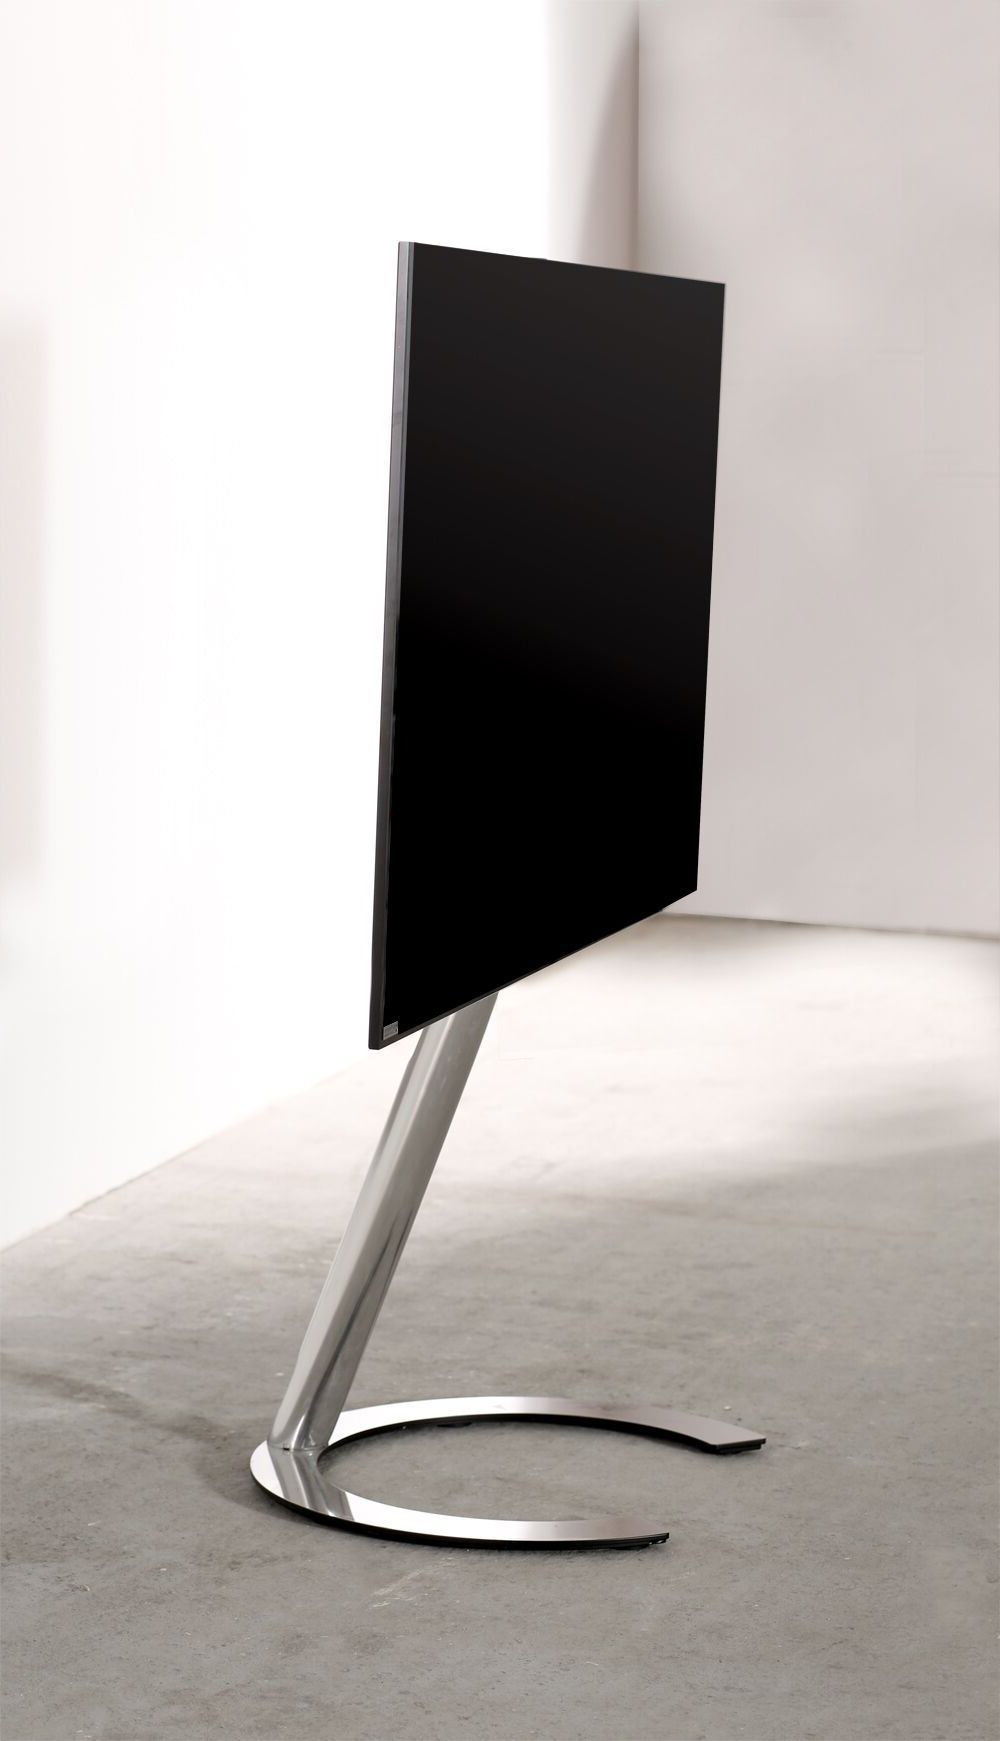 100cm Tv Stands With Most Recent Ecoline: Design At Low Price Level! More Is Less: Minimalist Tv (View 17 of 20)